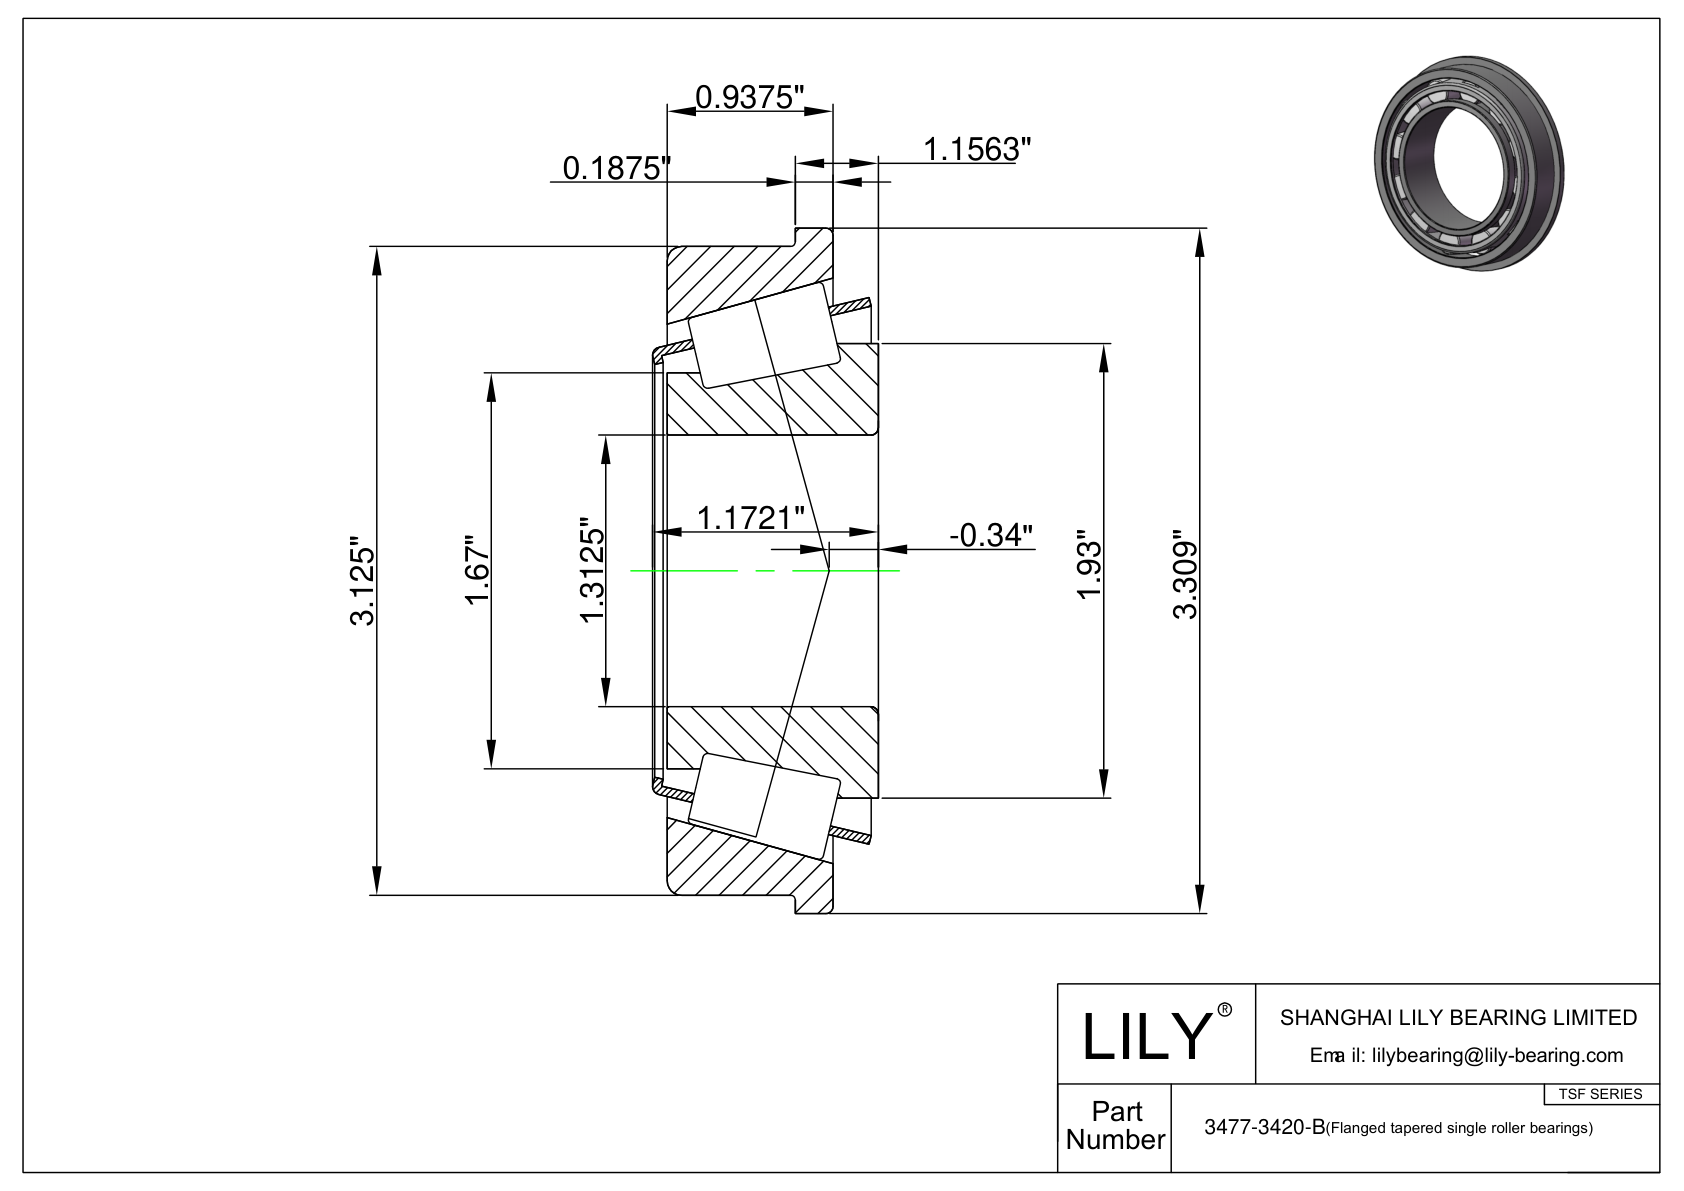 3477-3420-B TSF (Tapered Single Roller Bearings with Flange) (Imperial) cad drawing